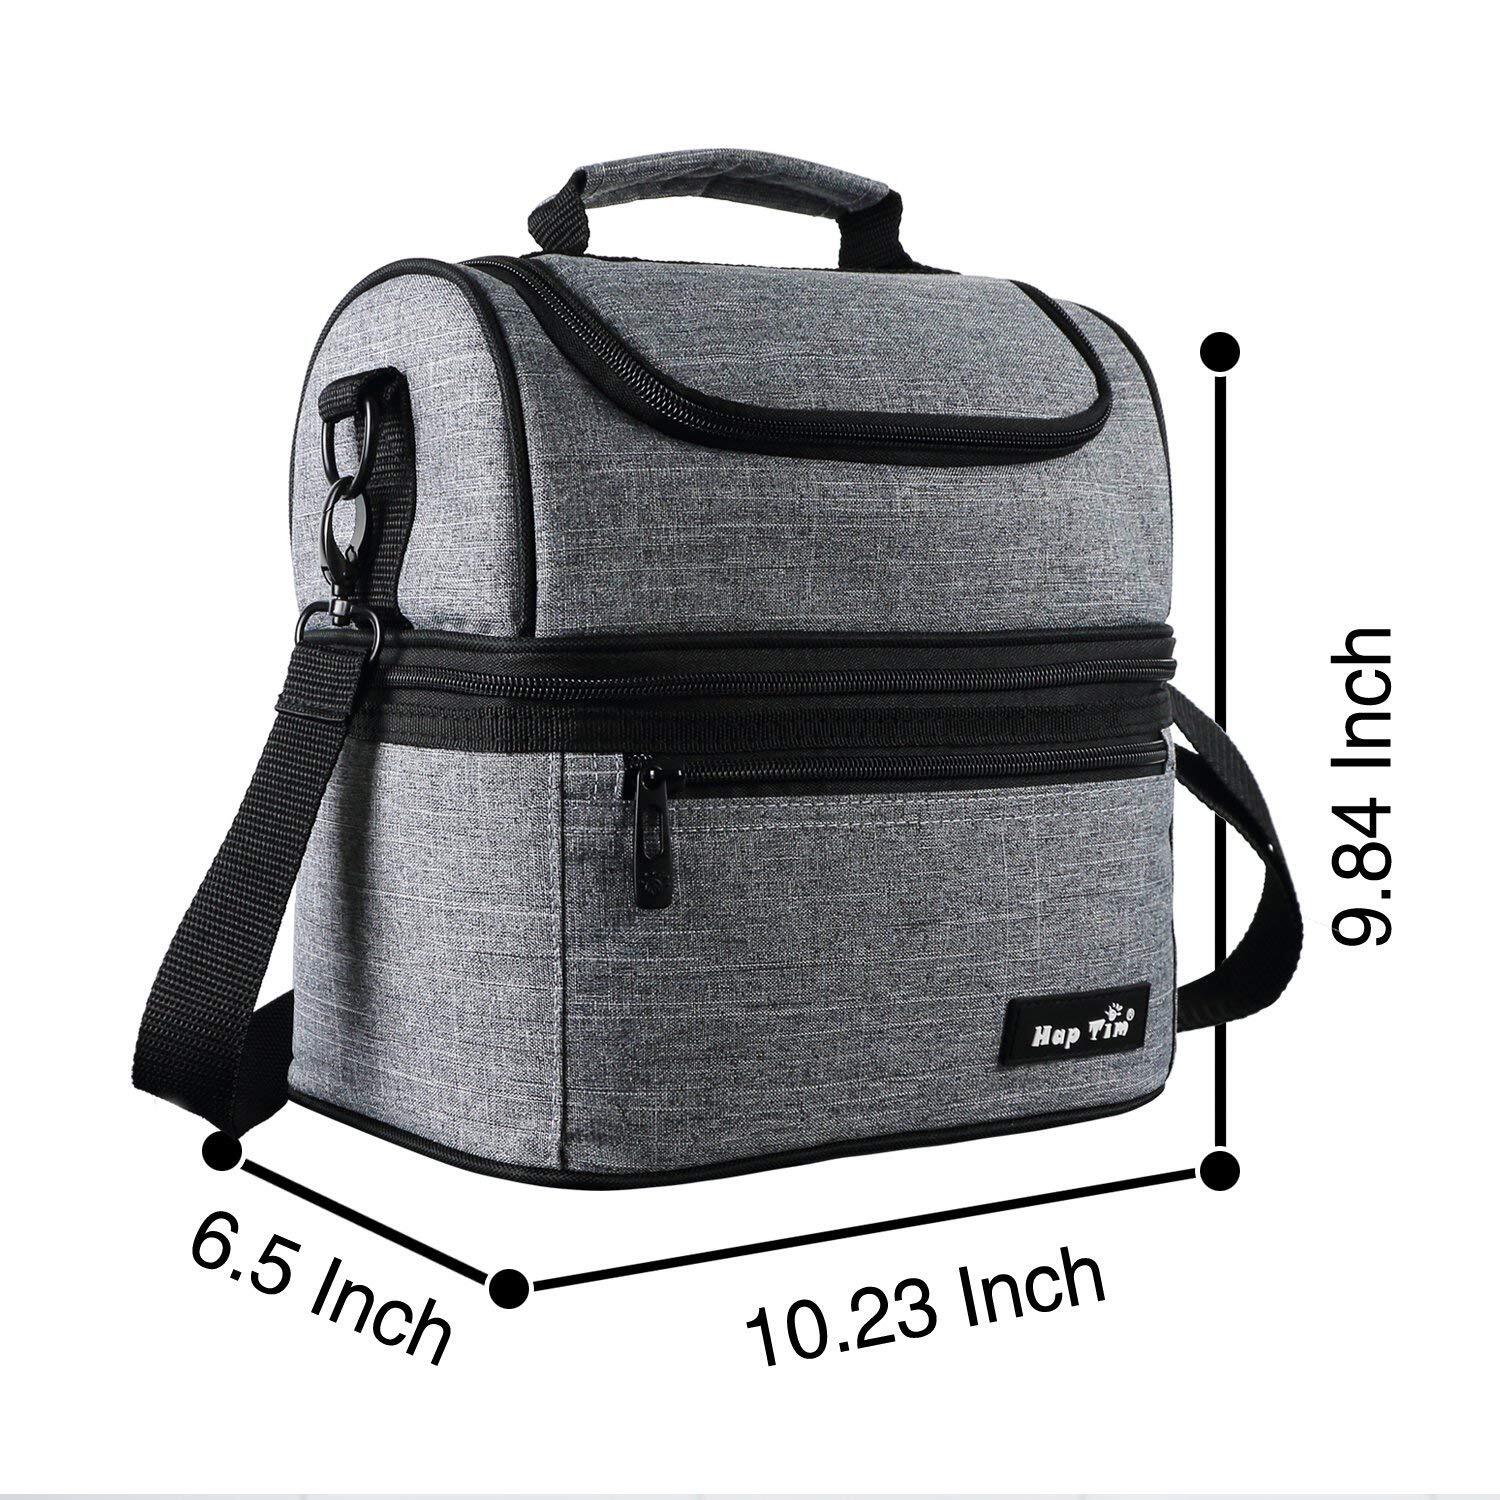 Best Hap Tim Insulated Lunch Bag for Men Women, Reusable Lunch Box for Kids  Boys, Spacious Lunchbox Adult (18654-DG) at shop diaper backpack, lunch box,  laptop backpack, picnic backpack, cooler bag and